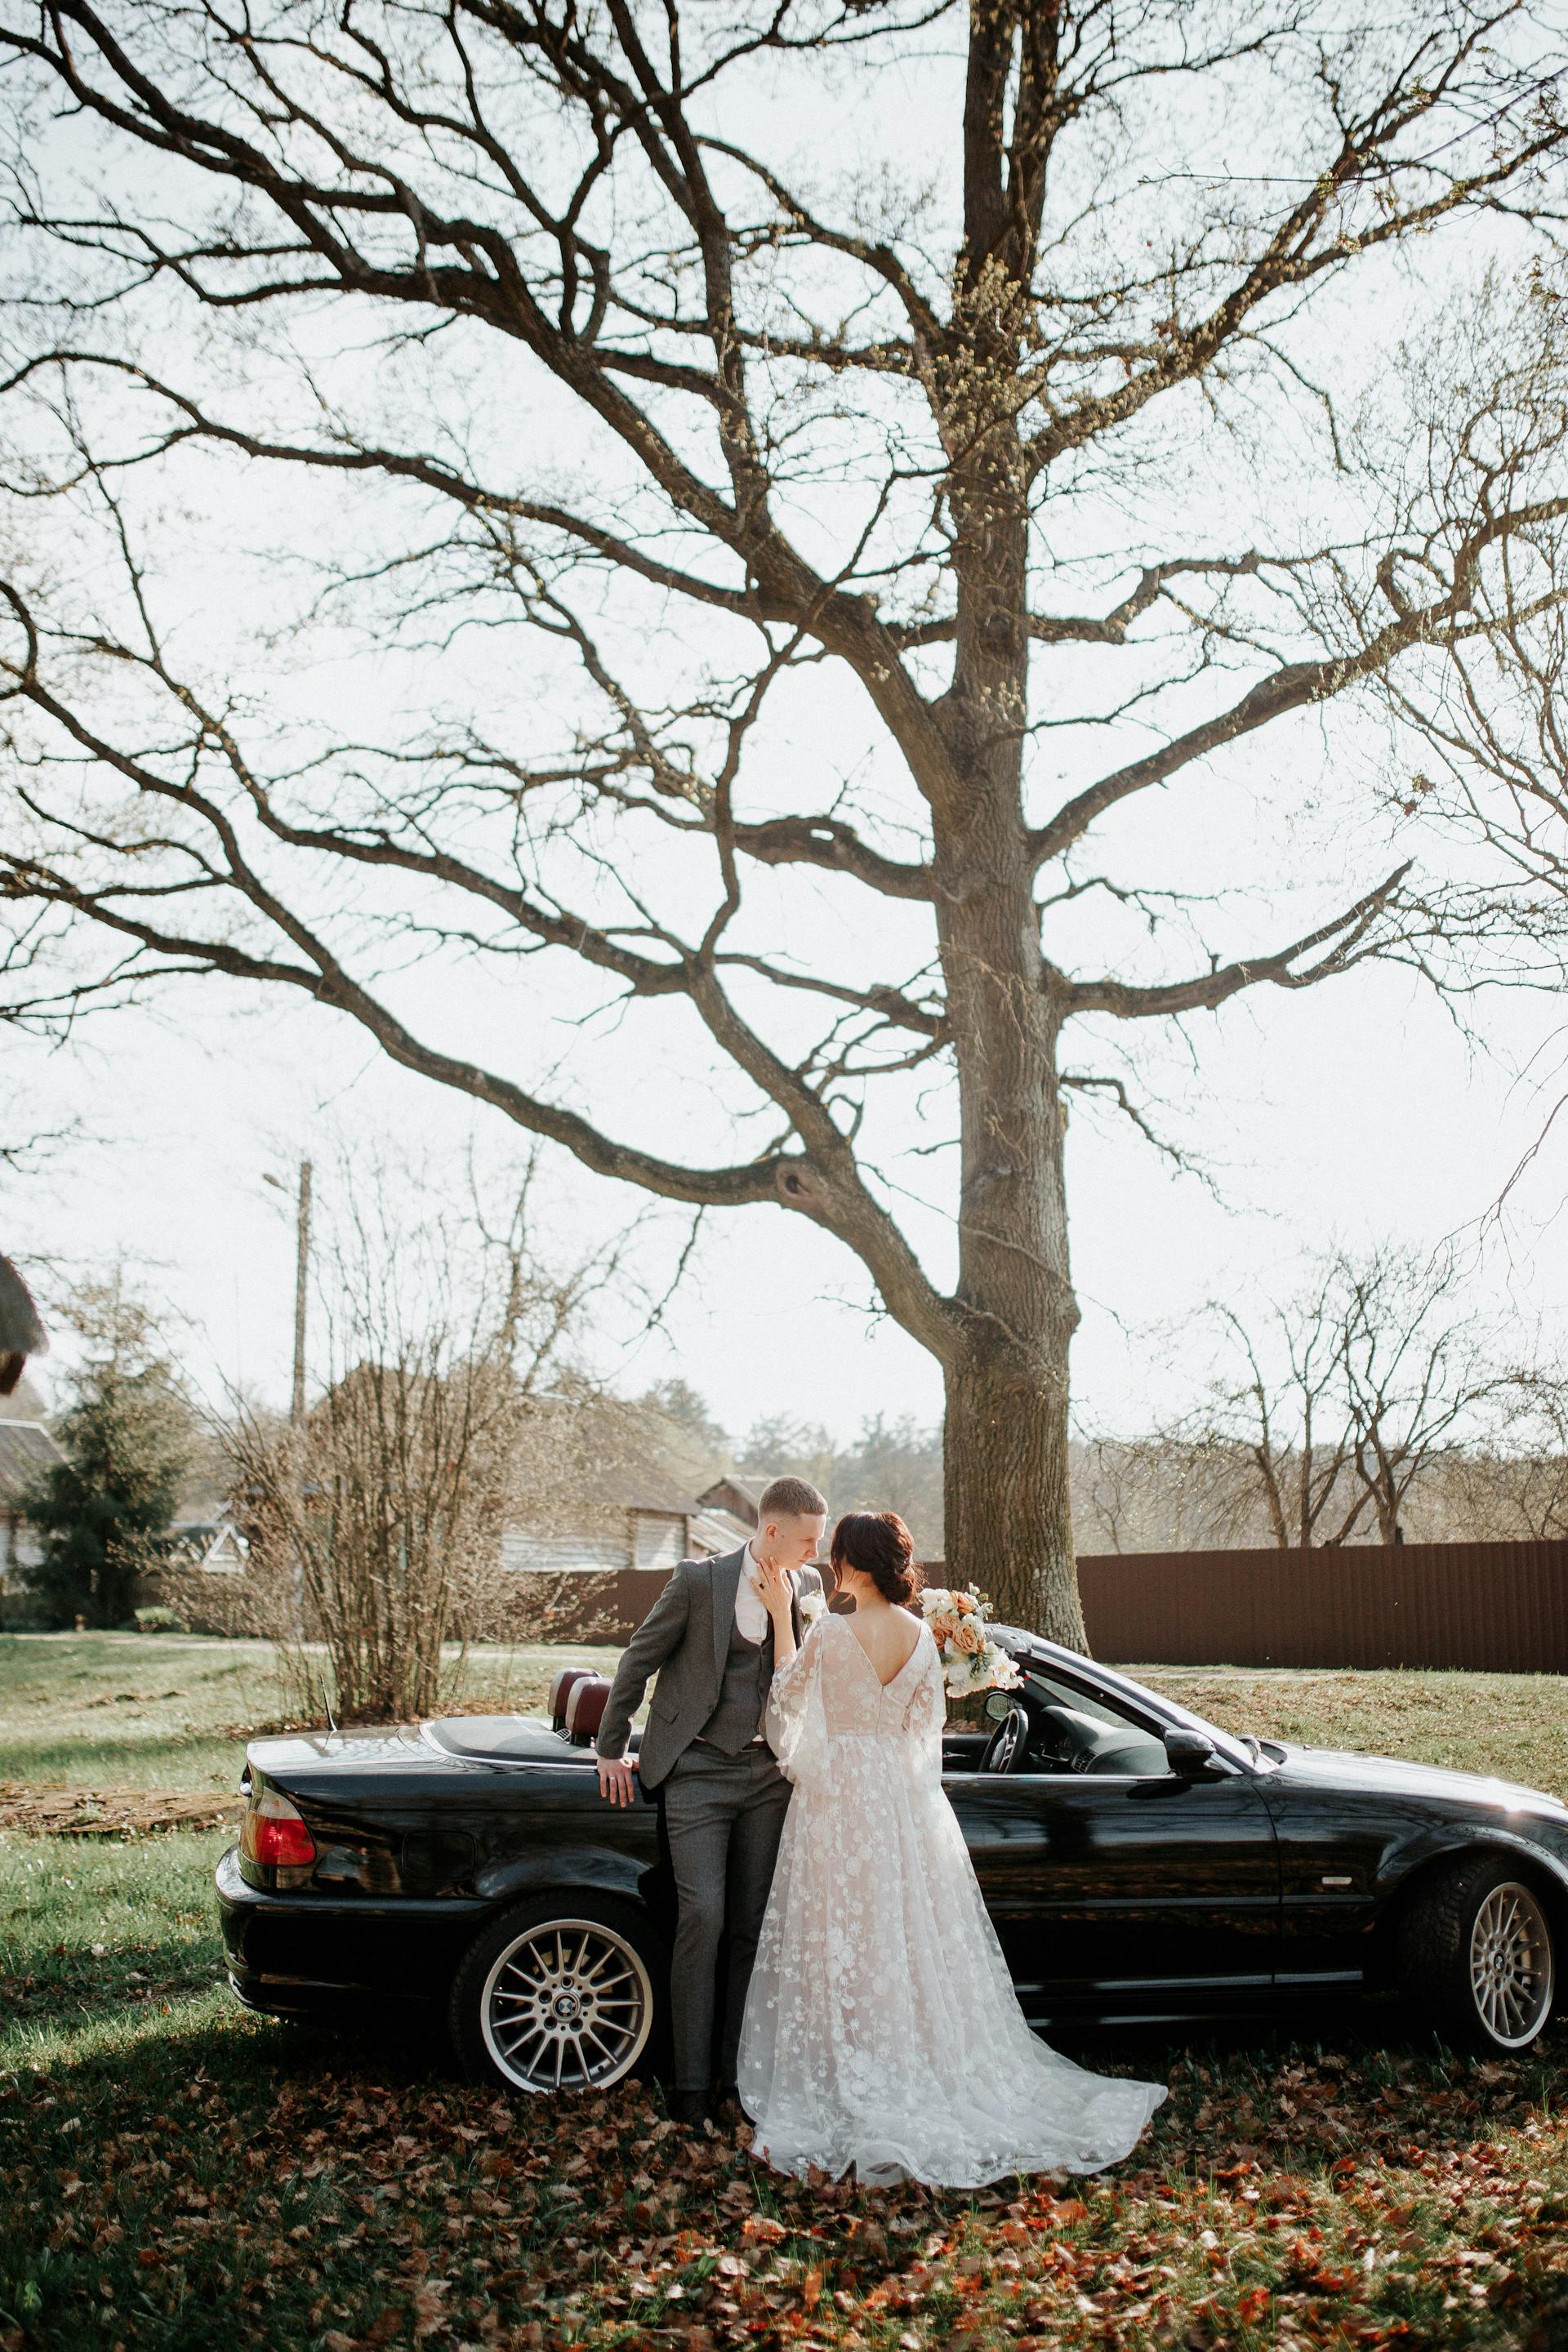 A bride and groom standing next to a car | Source: Pexels